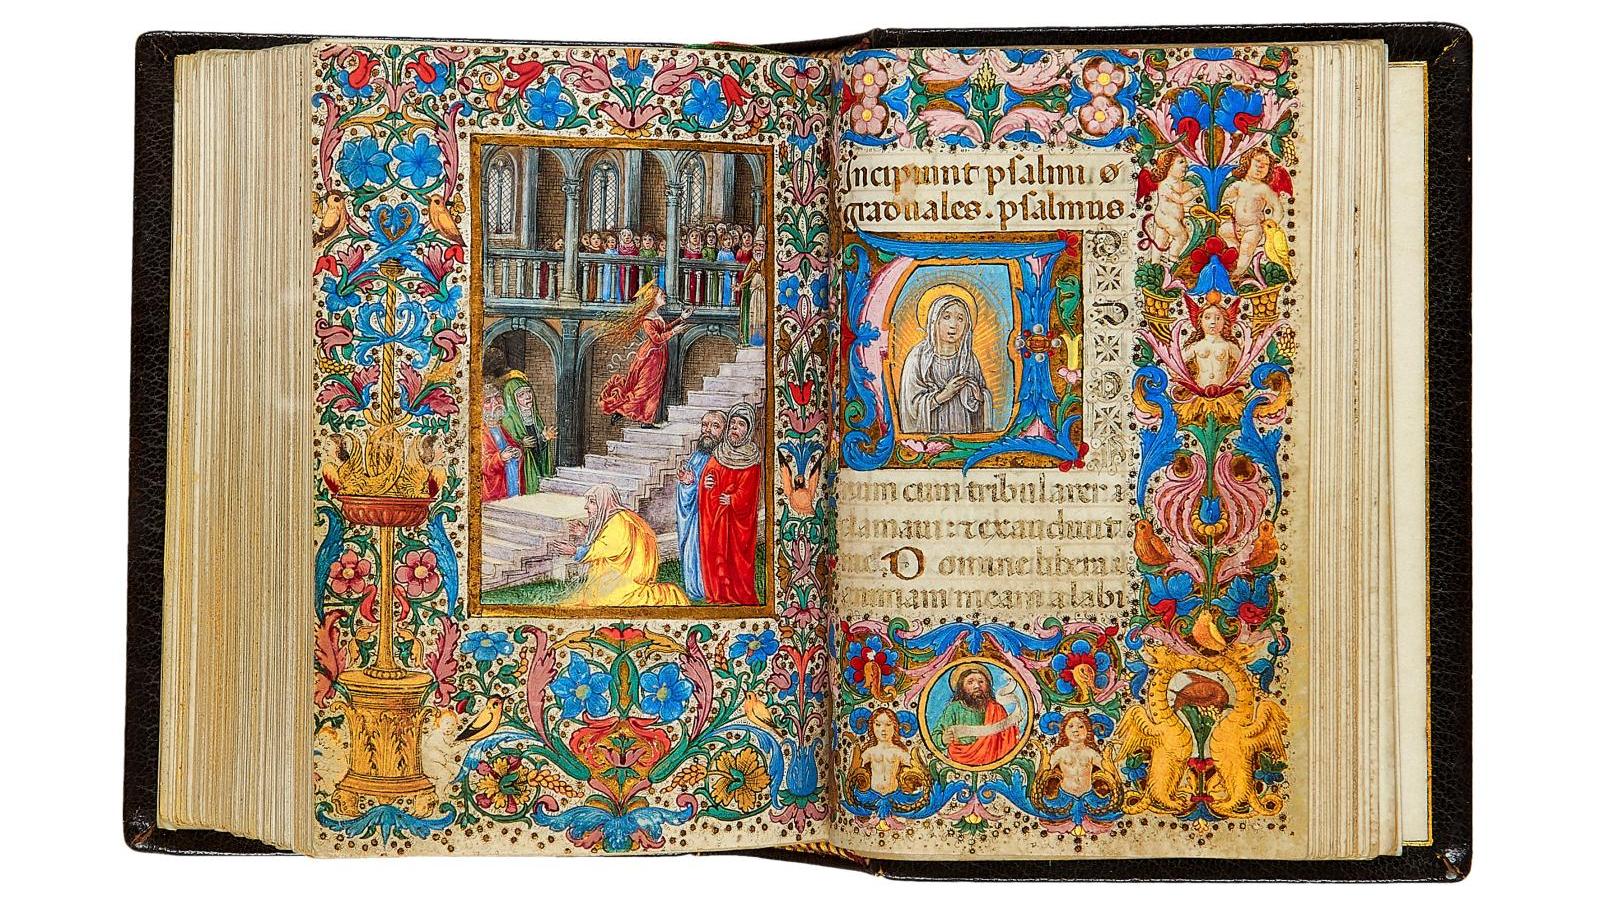 The Hours of Isabella d’Este, Rite of Rome, in Latin, c. 1490. opulently illuminated... ﻿Isabelle d'Este's Book of Hours